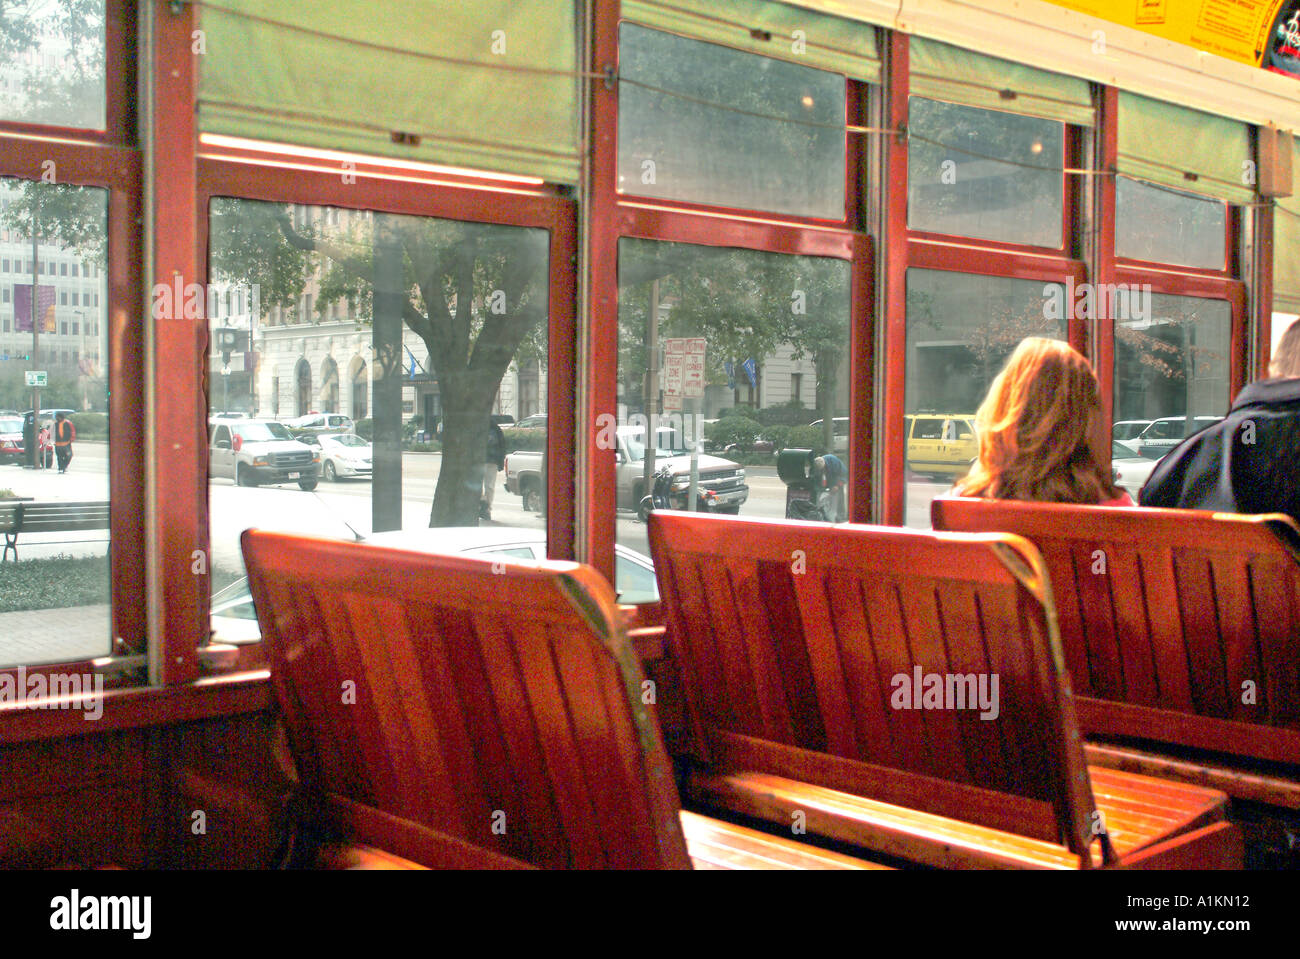 Interior of New Orleans streetcar Stock Photo